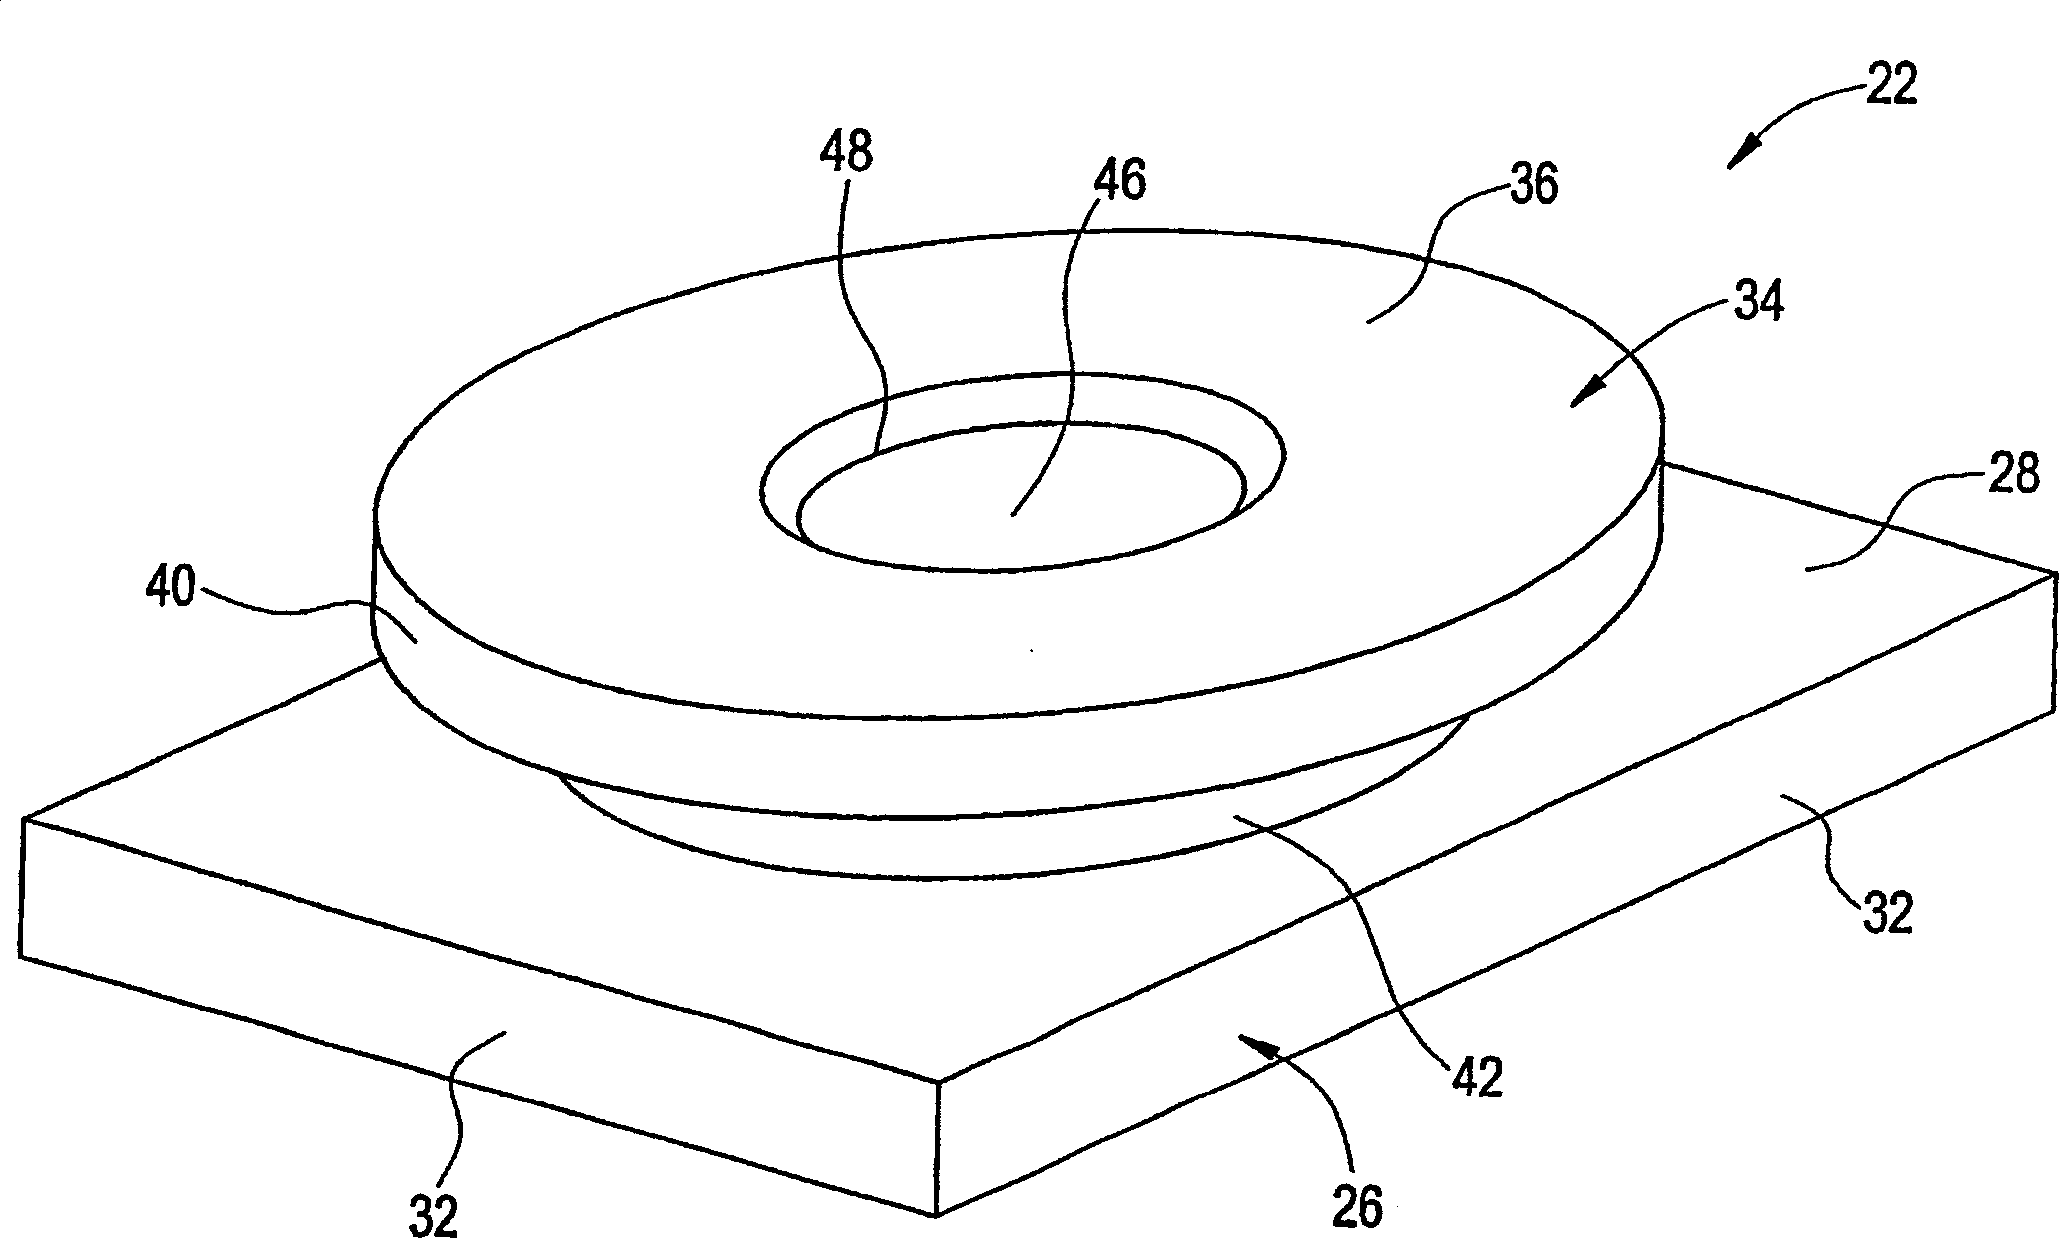 Cage nut assembly having a flexible cage